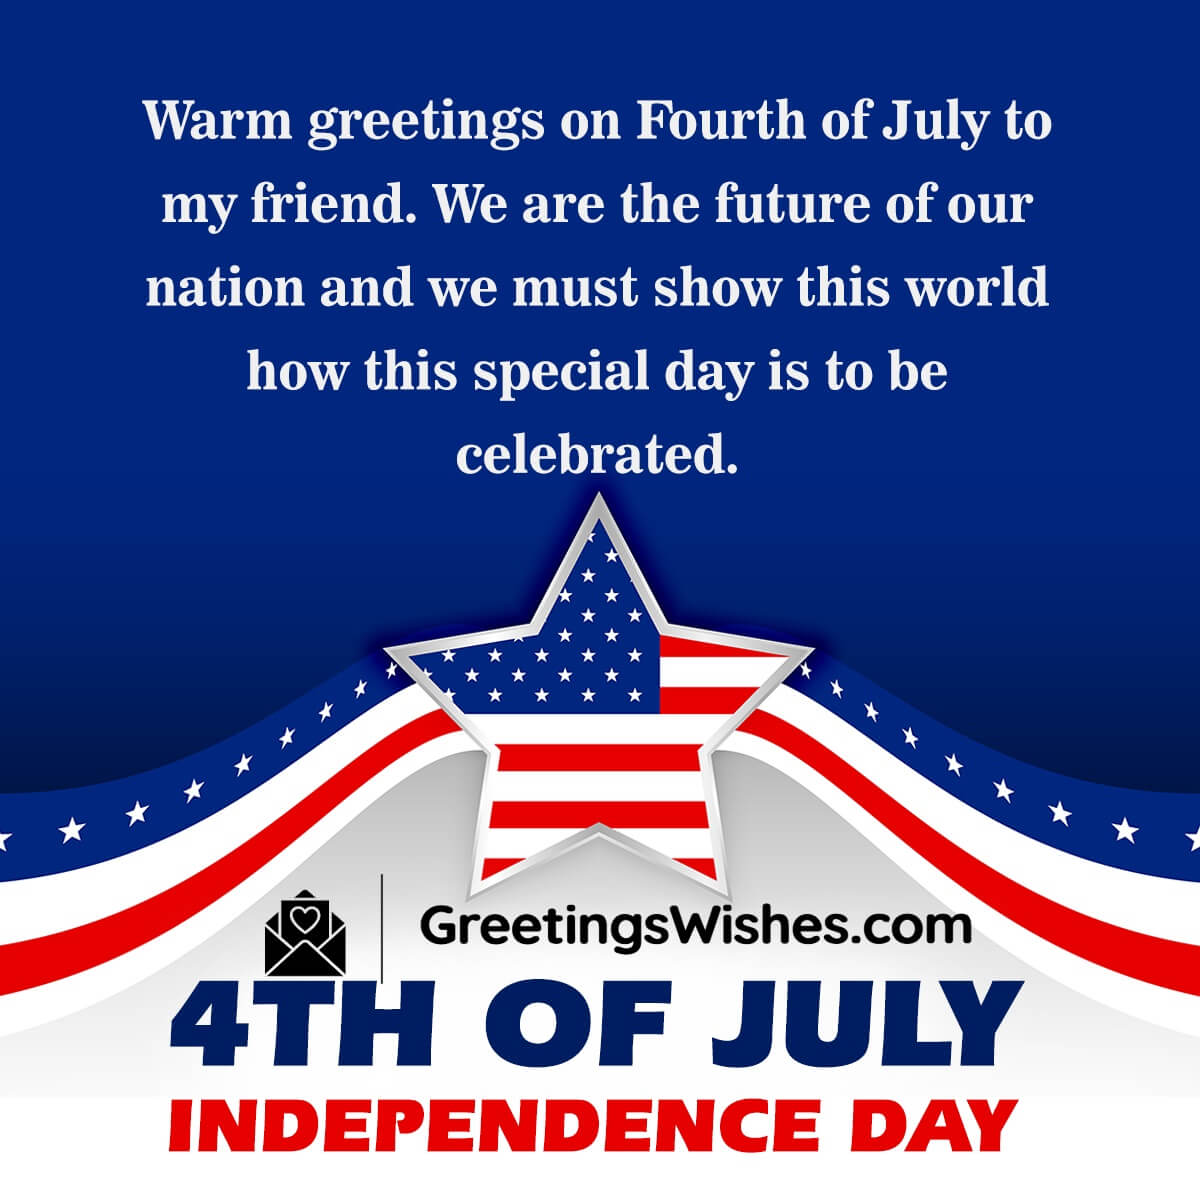 4th Of July Independence Day Greetings